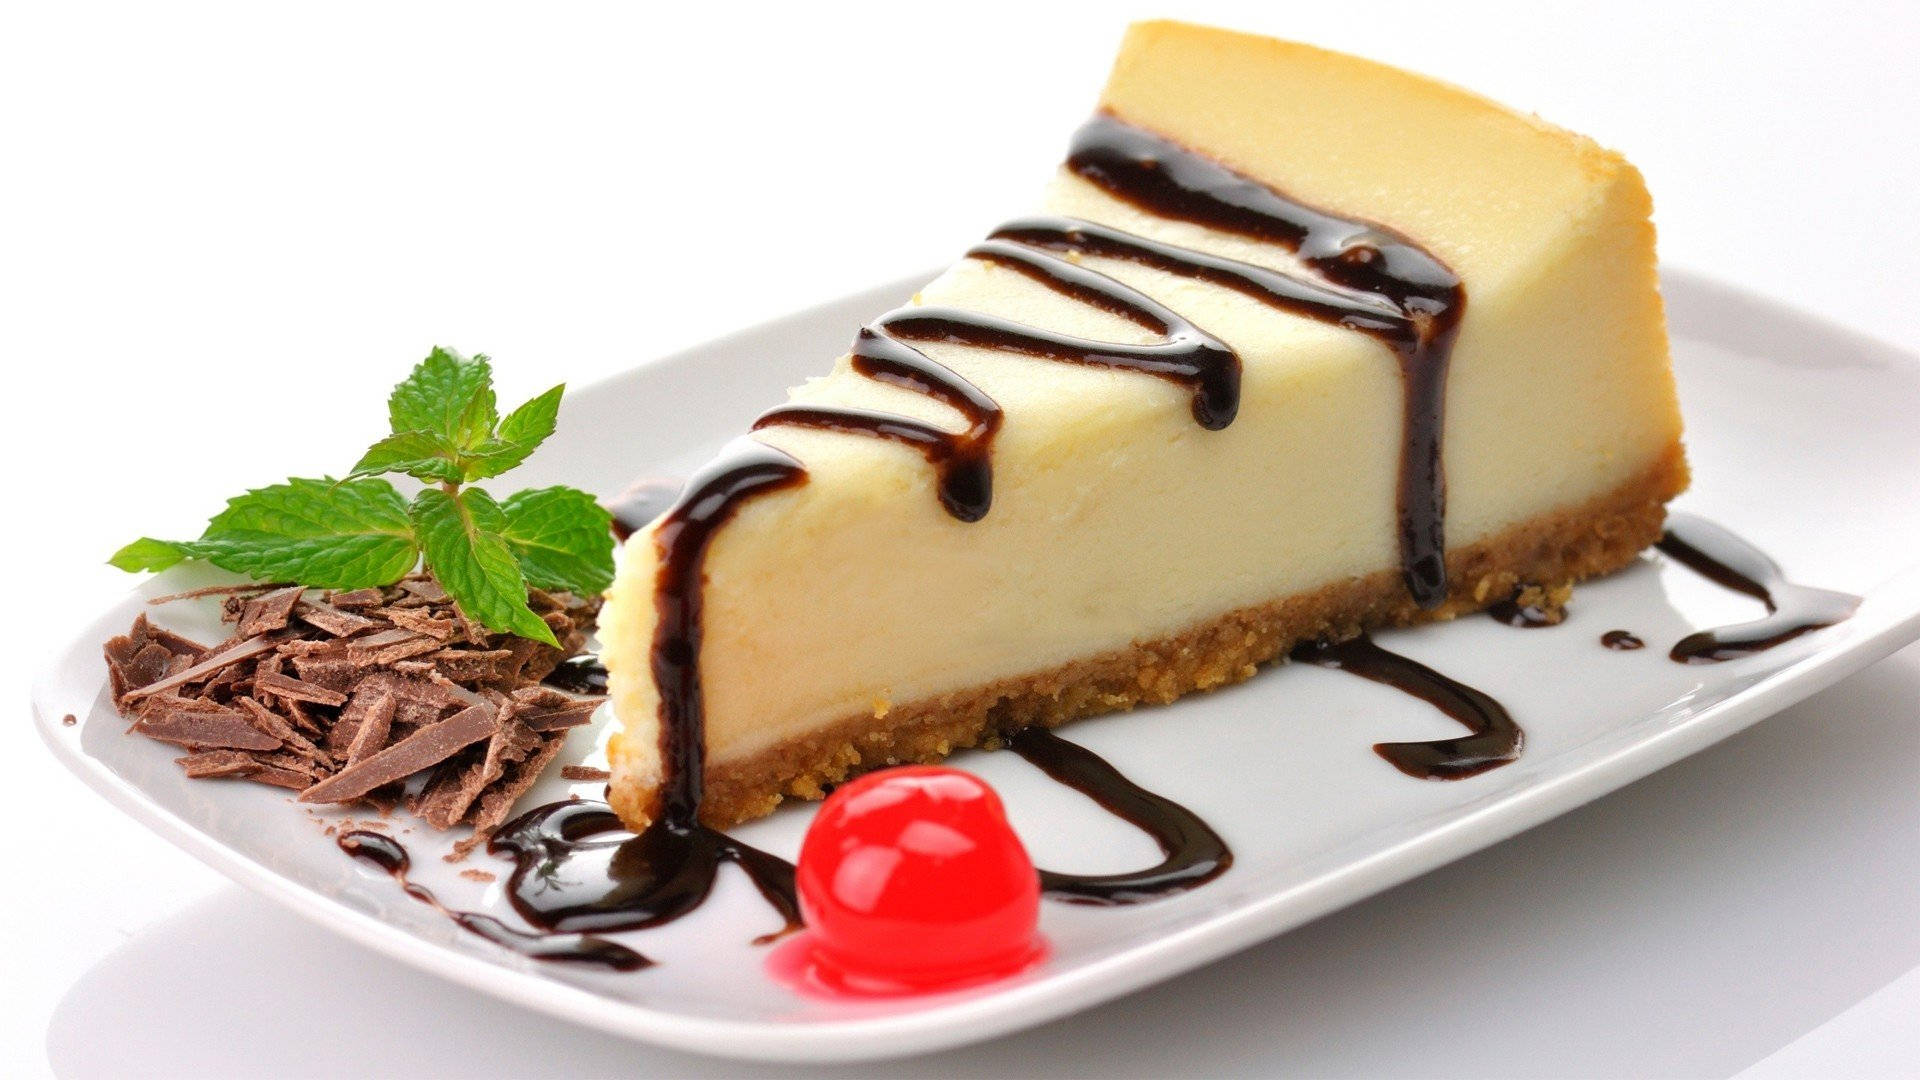 Cheesecake With Chocolate Syrup Dessert Background